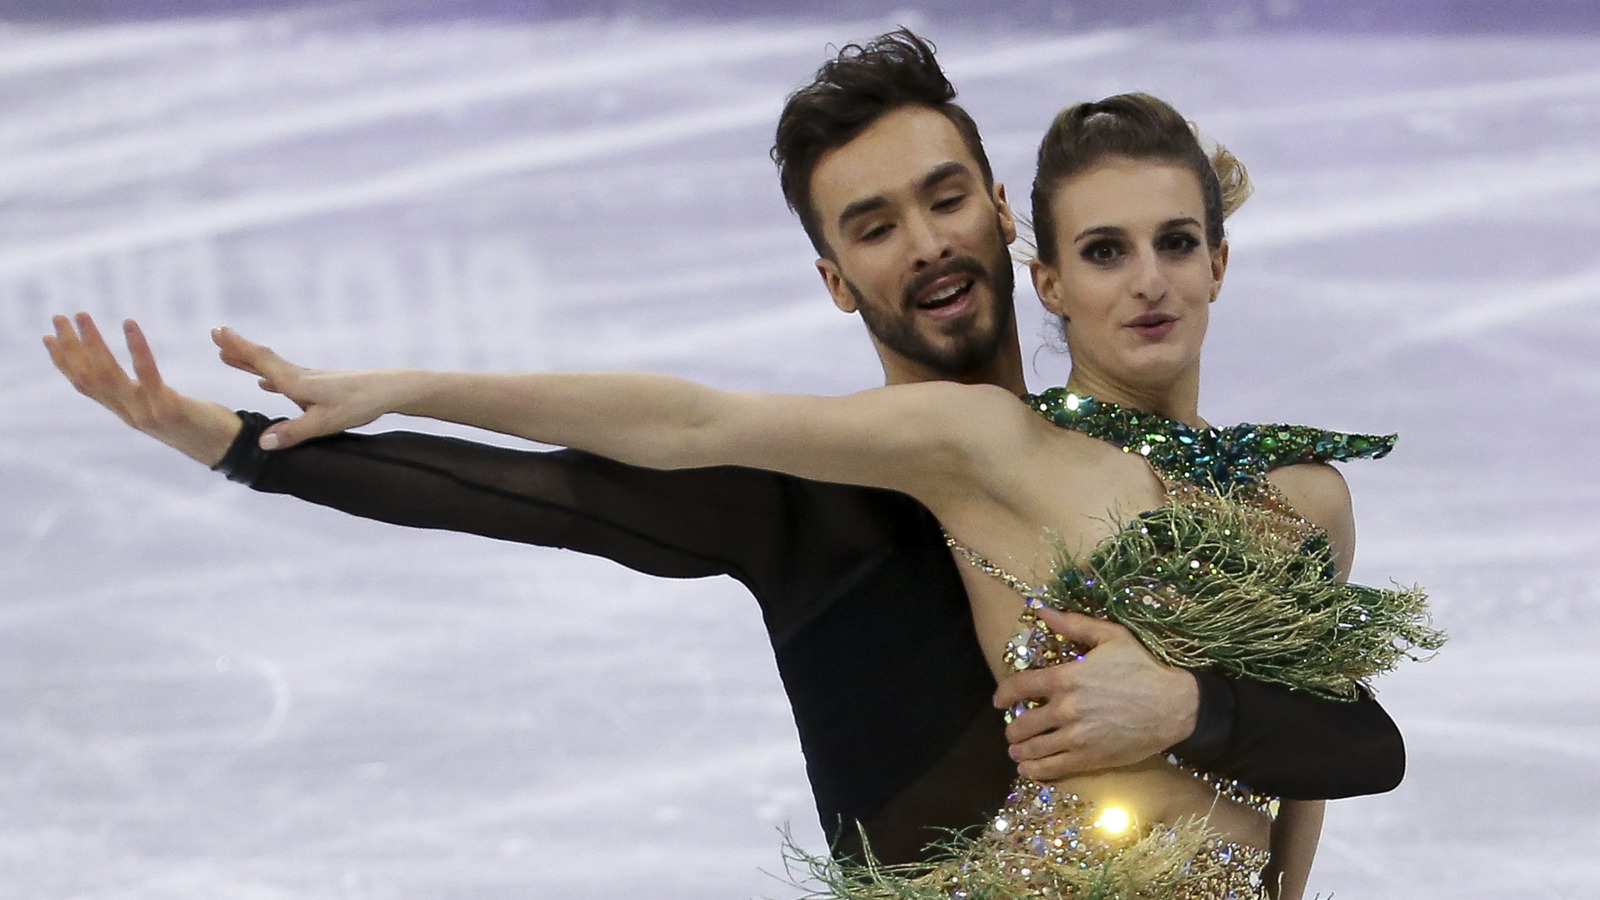 Awkward Olympic Figure Skating Moments That Were Caught On Camera - The Lis...